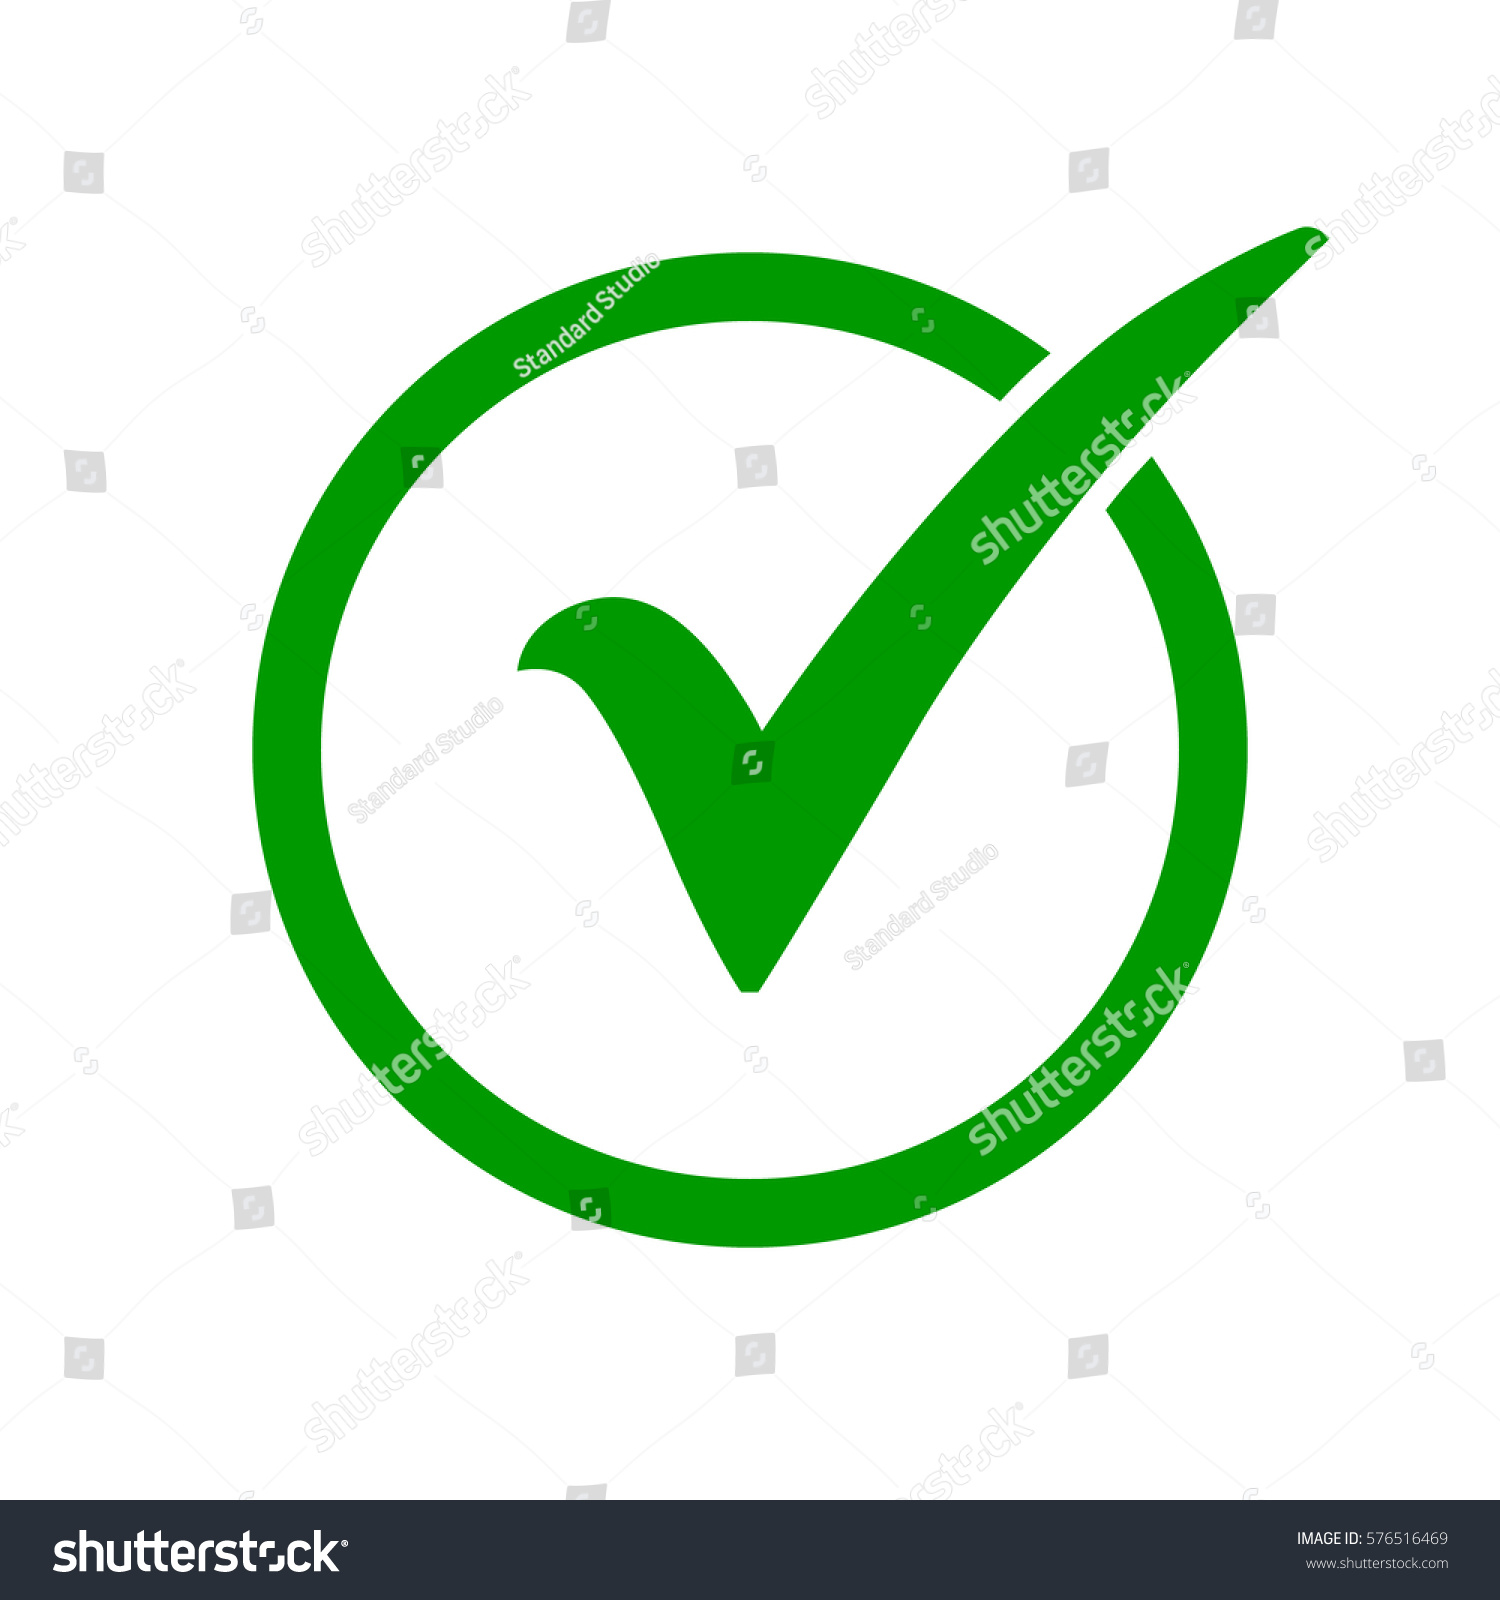 Green check mark icon in a circle. Tick symbol in green color, vector illustration. #576516469